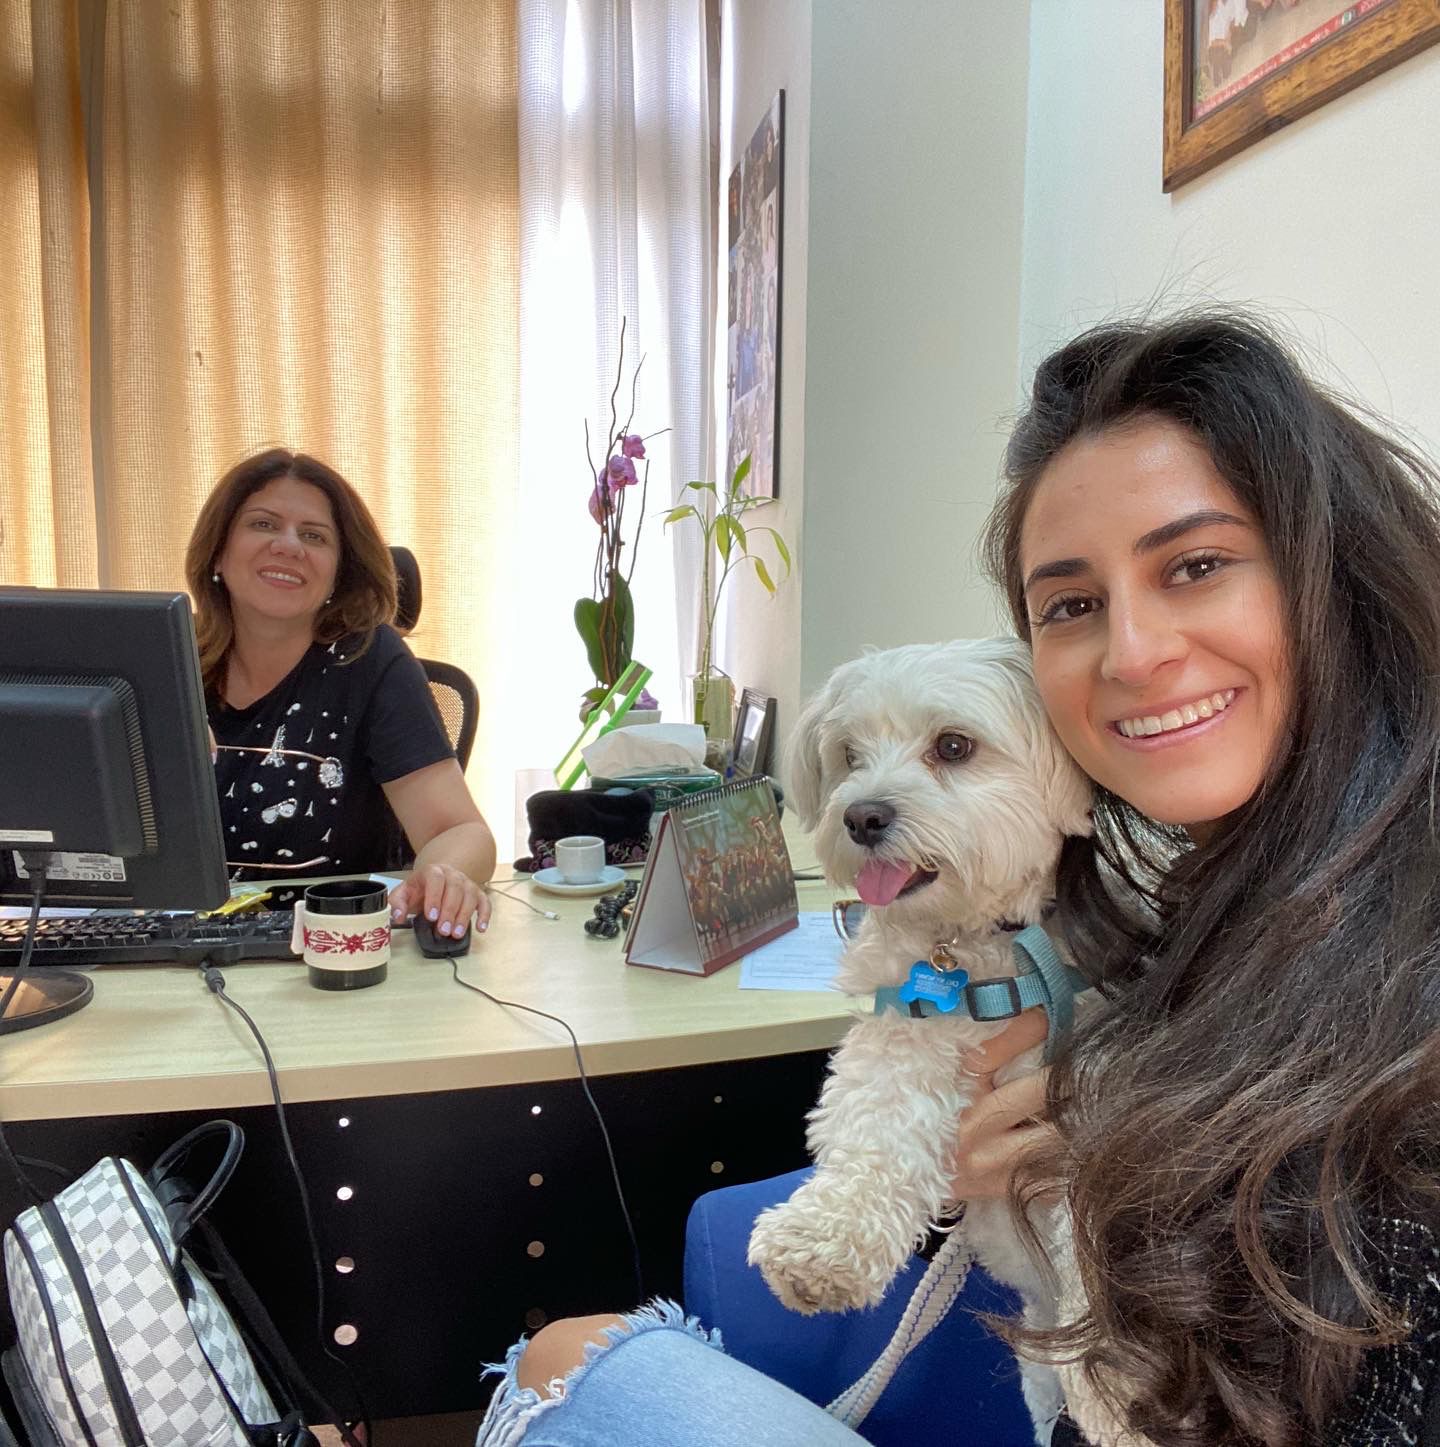 Lina Abu Akleh with her aunt, Shireen, in her office on May 2 (Courtesy of Lina Abu Akleh)